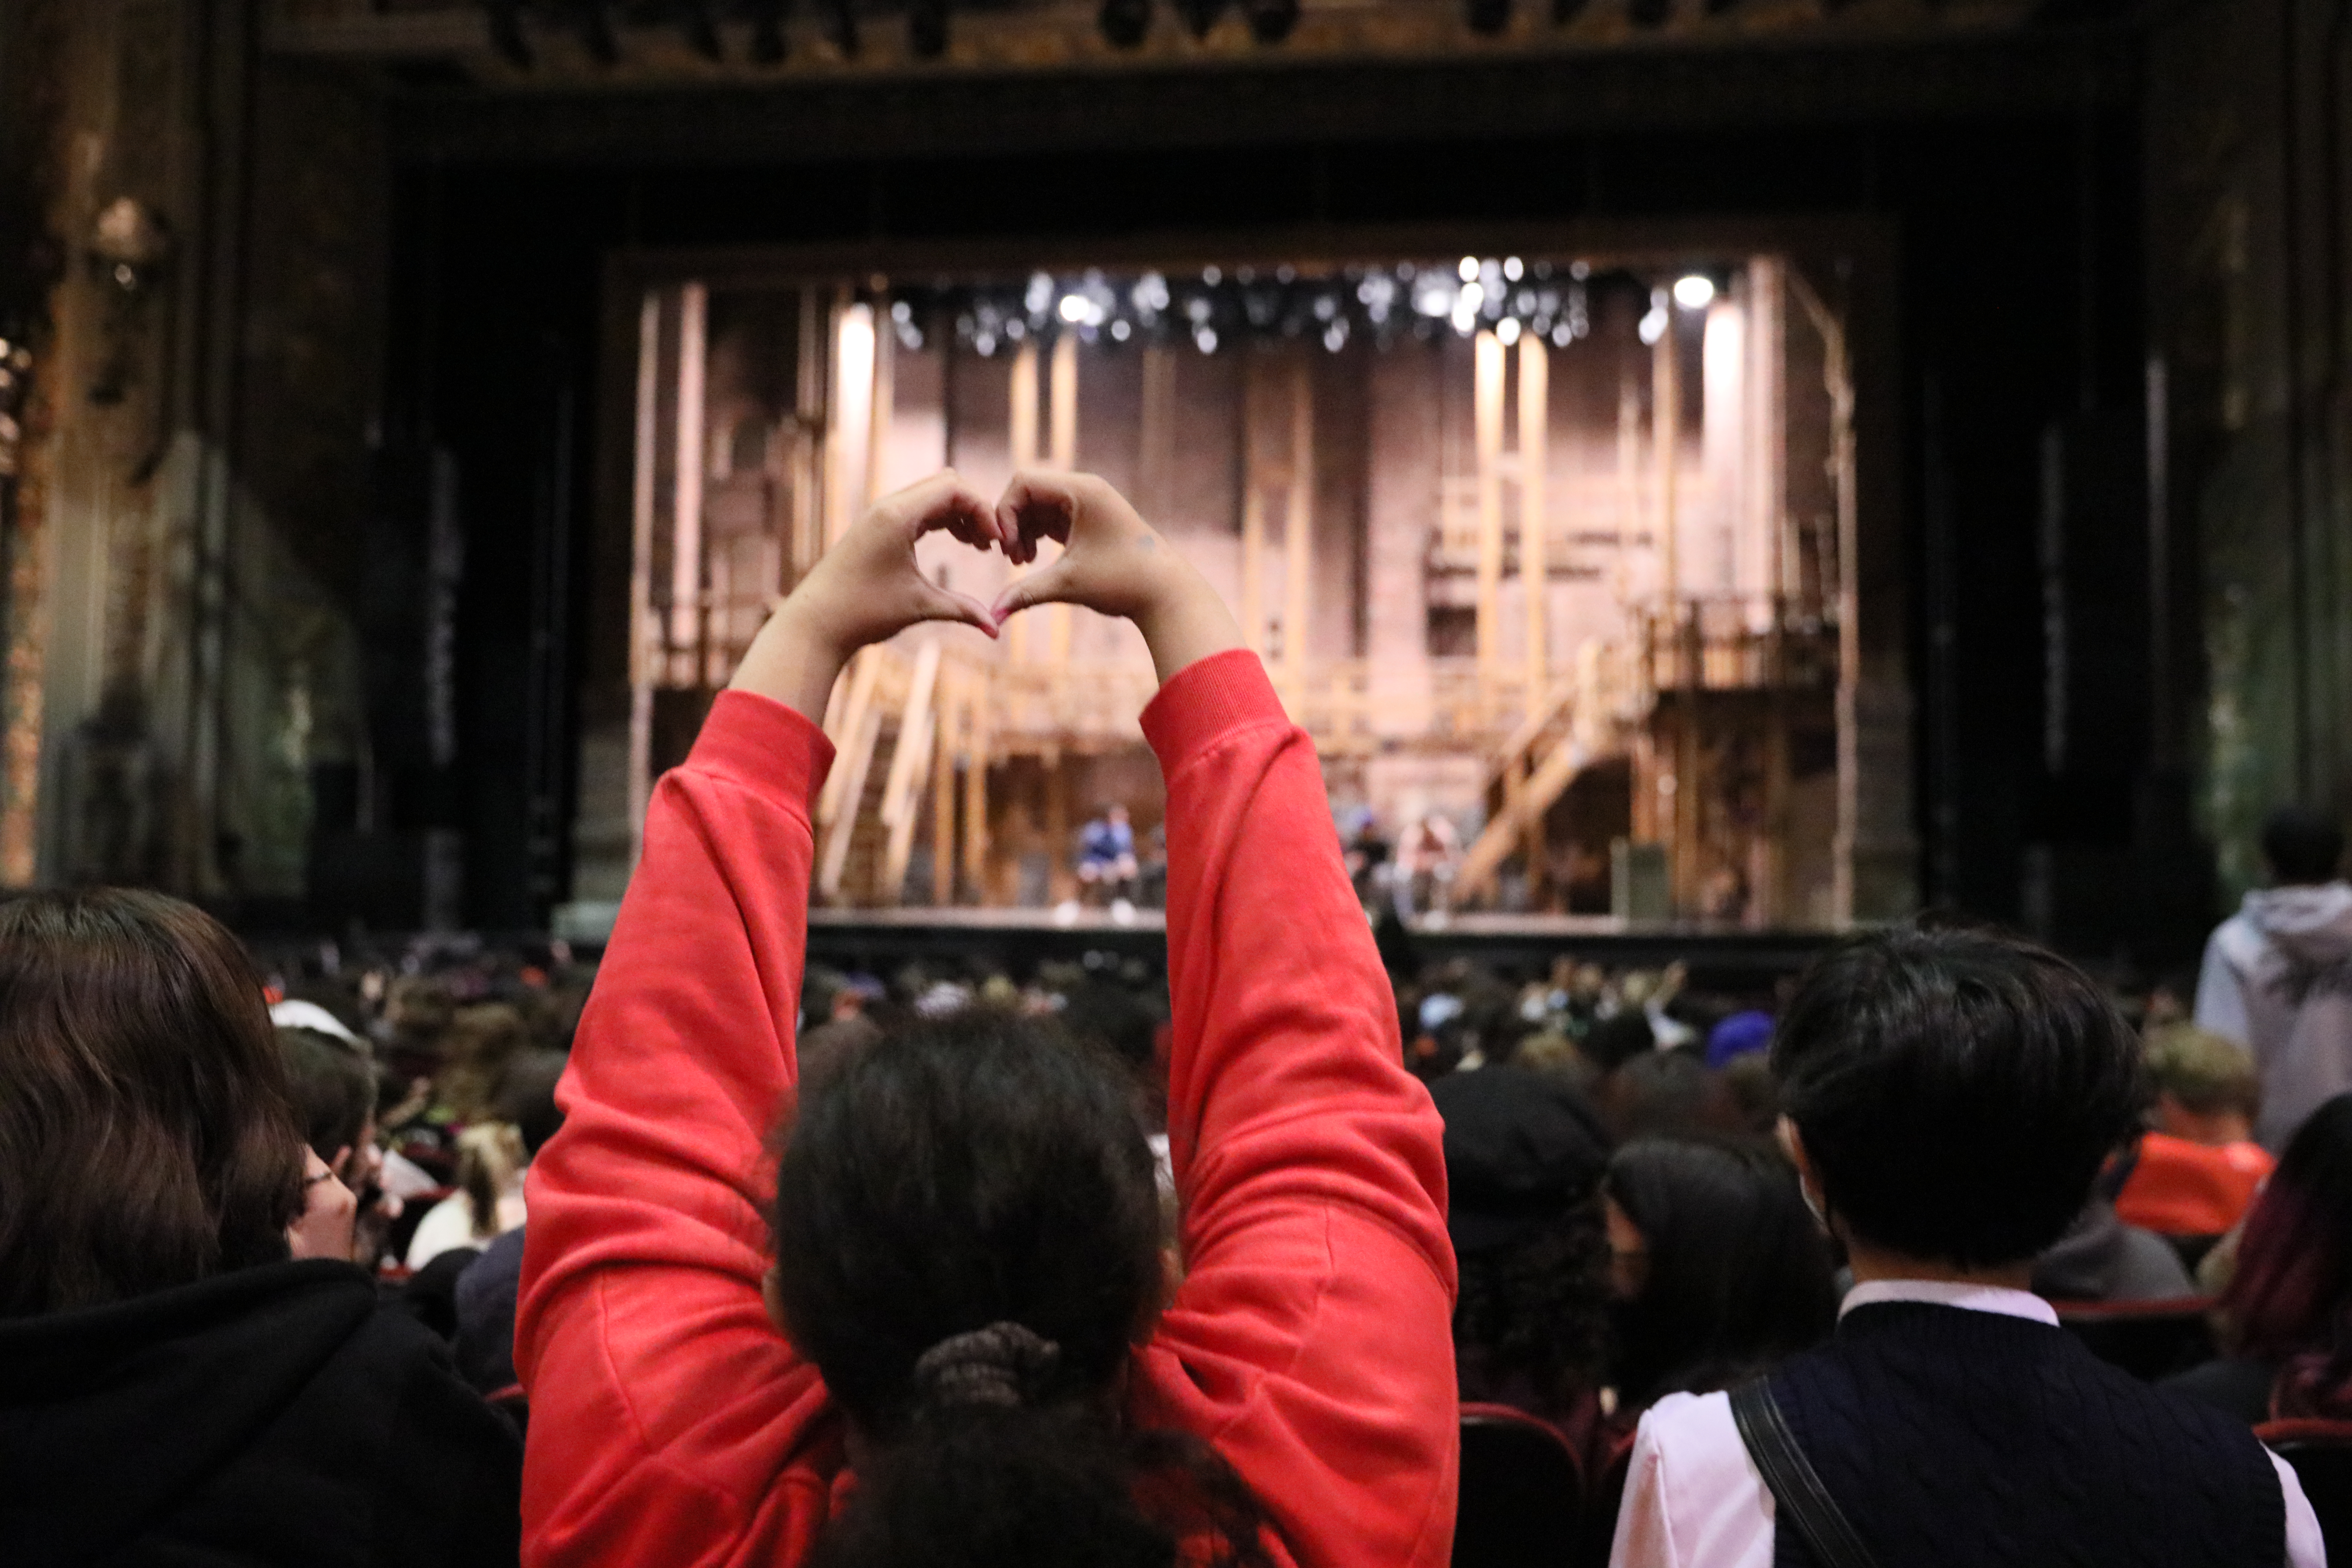 EduHam matinee performance on February 9, 2022 at the Hollywood Pantages Theatre